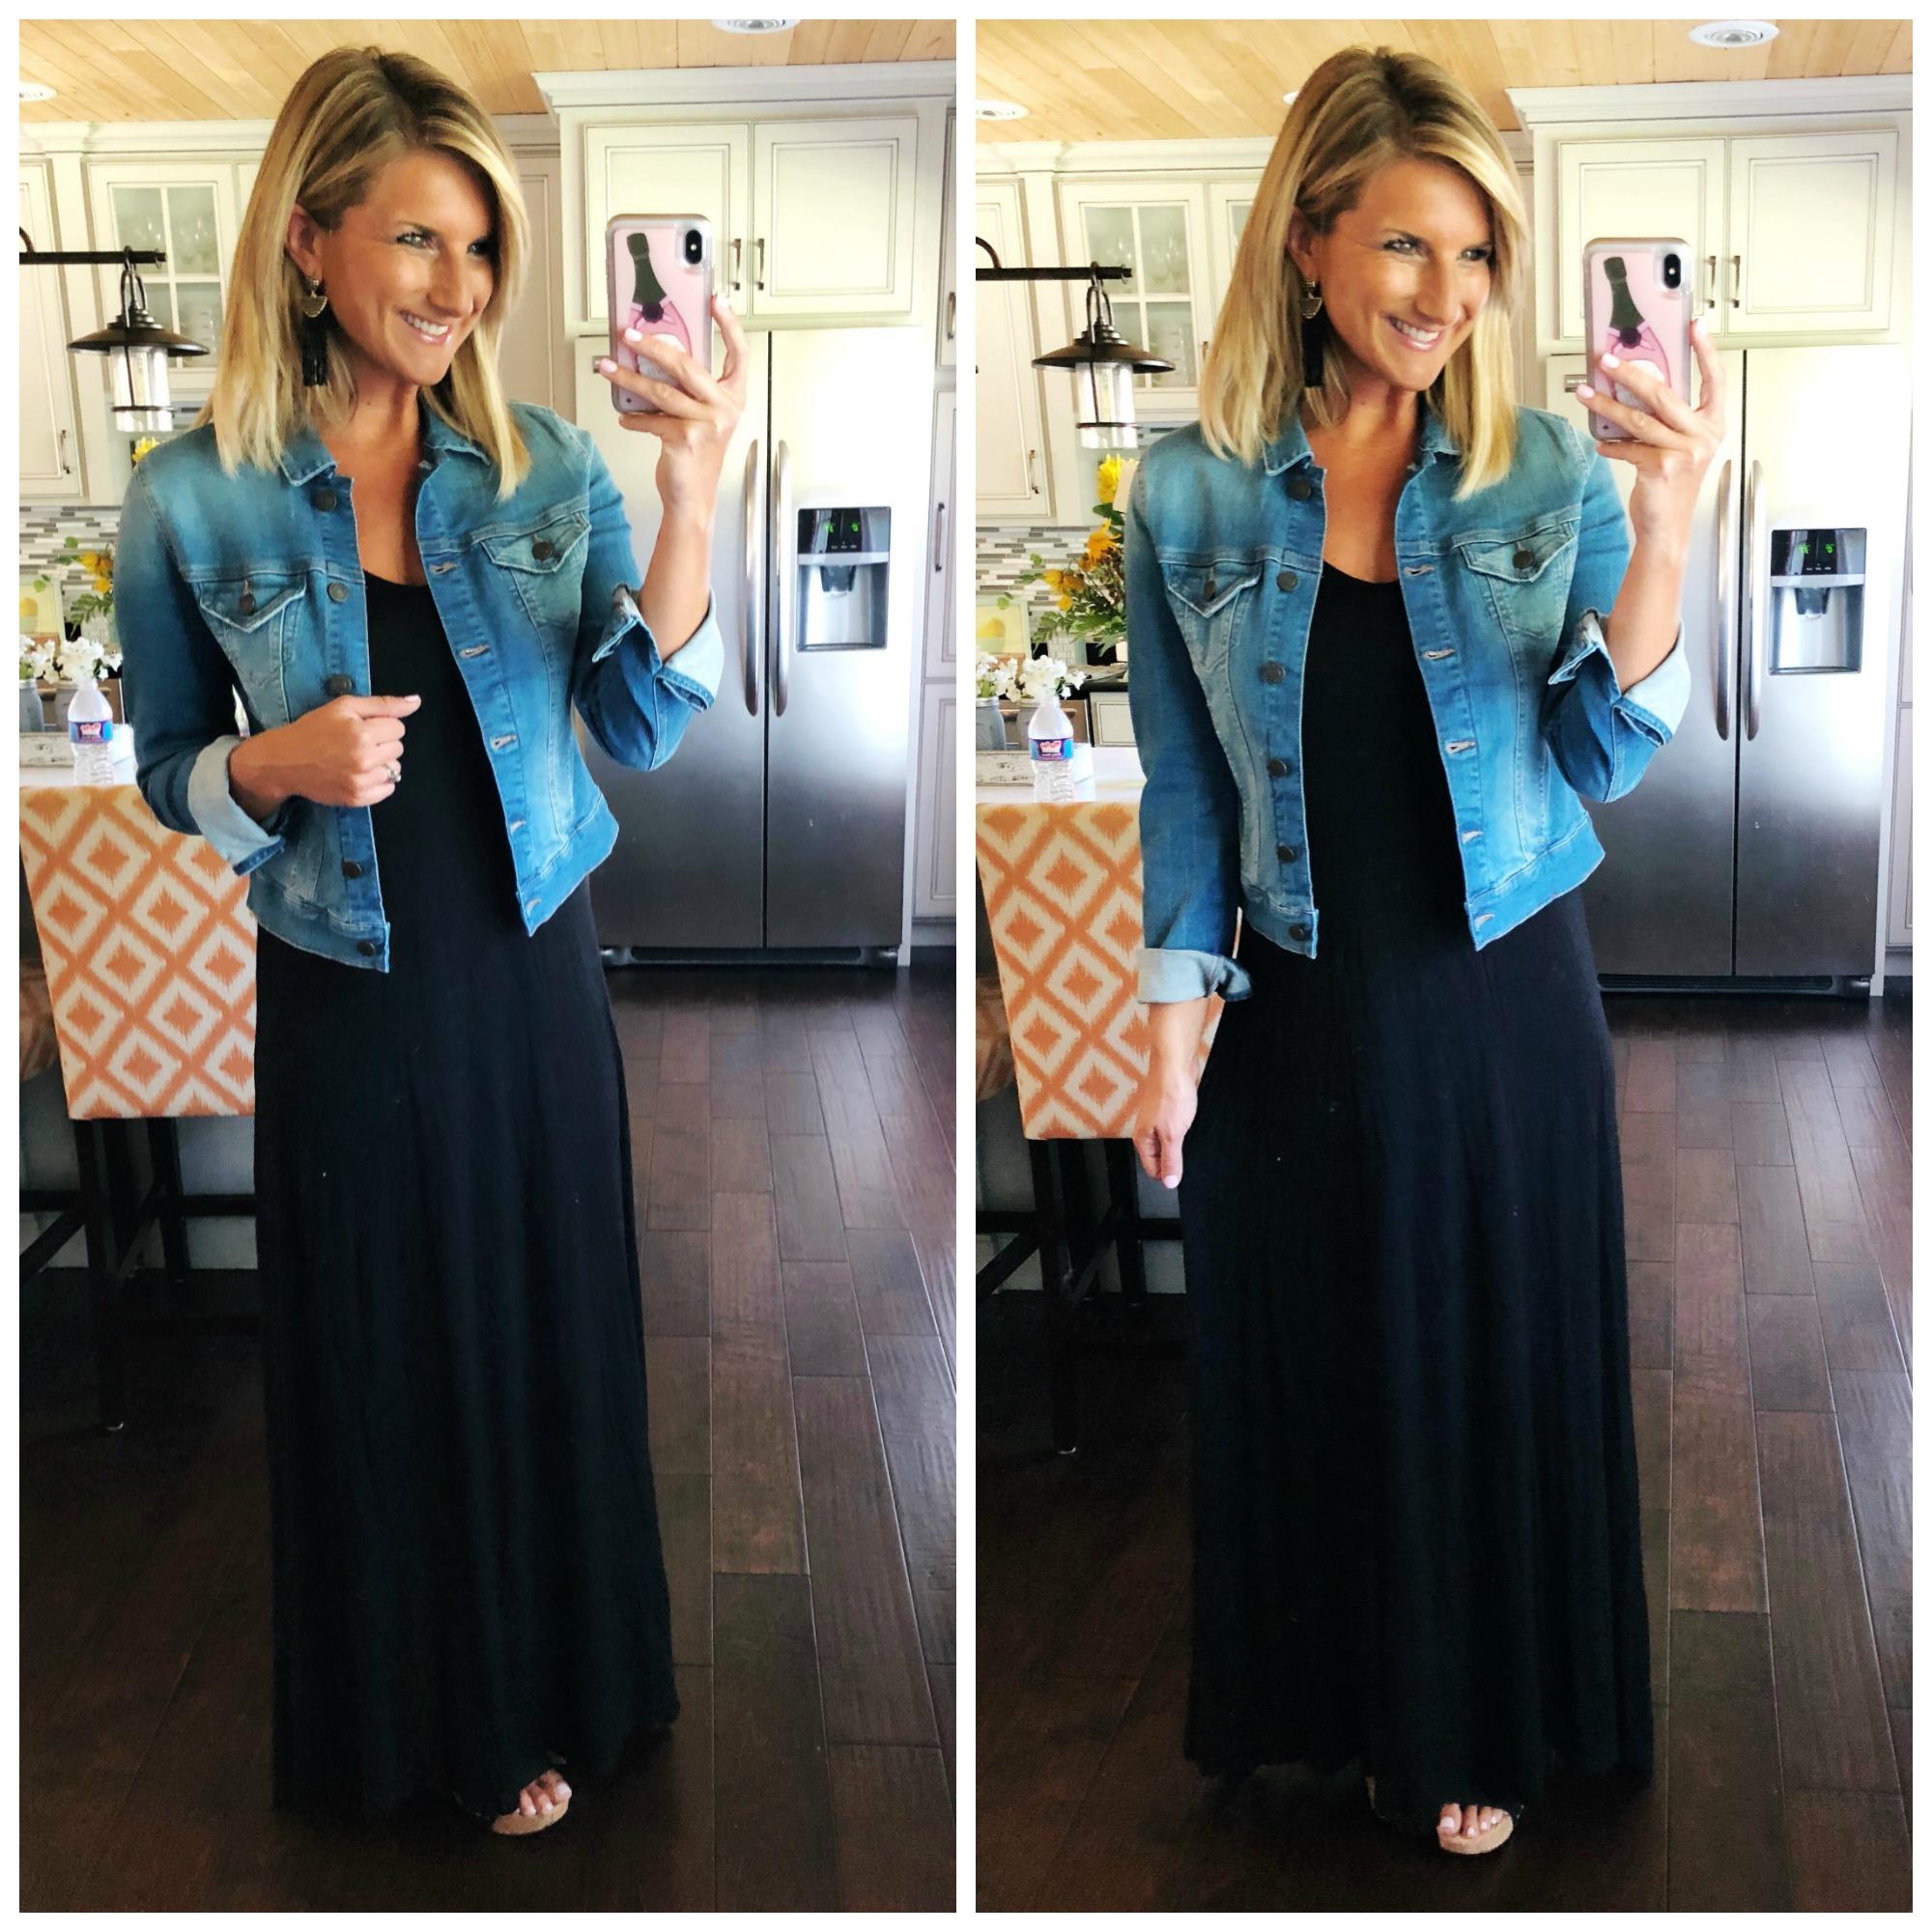 Perfect Black Maxi Dress for a wedding, work, event or everyday // Closet Staple Denim Jacket // How to Style a Maxi Dress